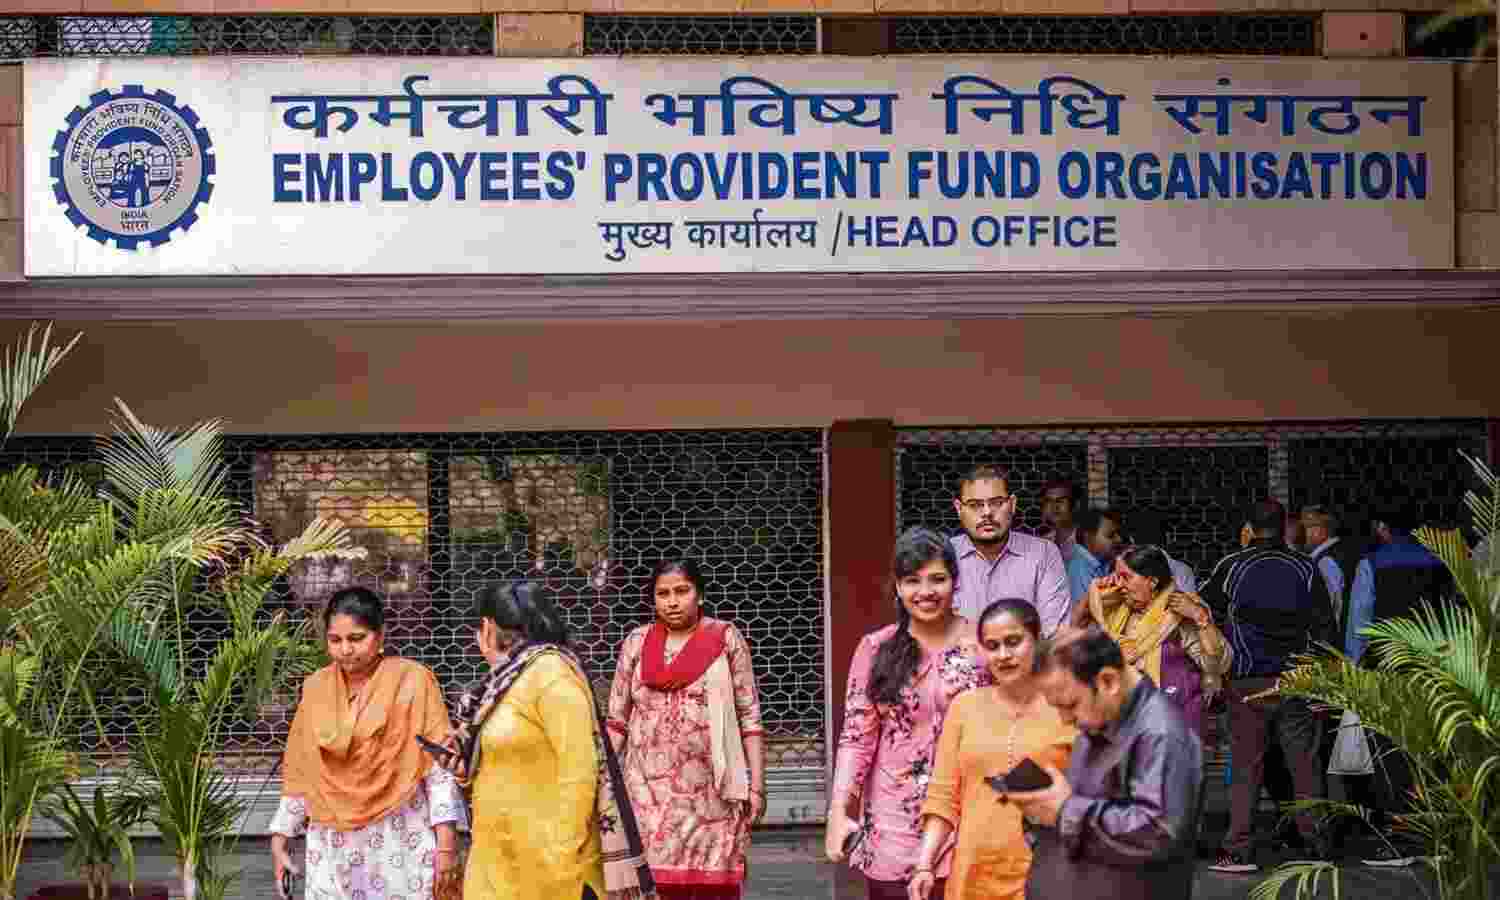 EPFO records 1.44 million new members in March, with youths making up 57%